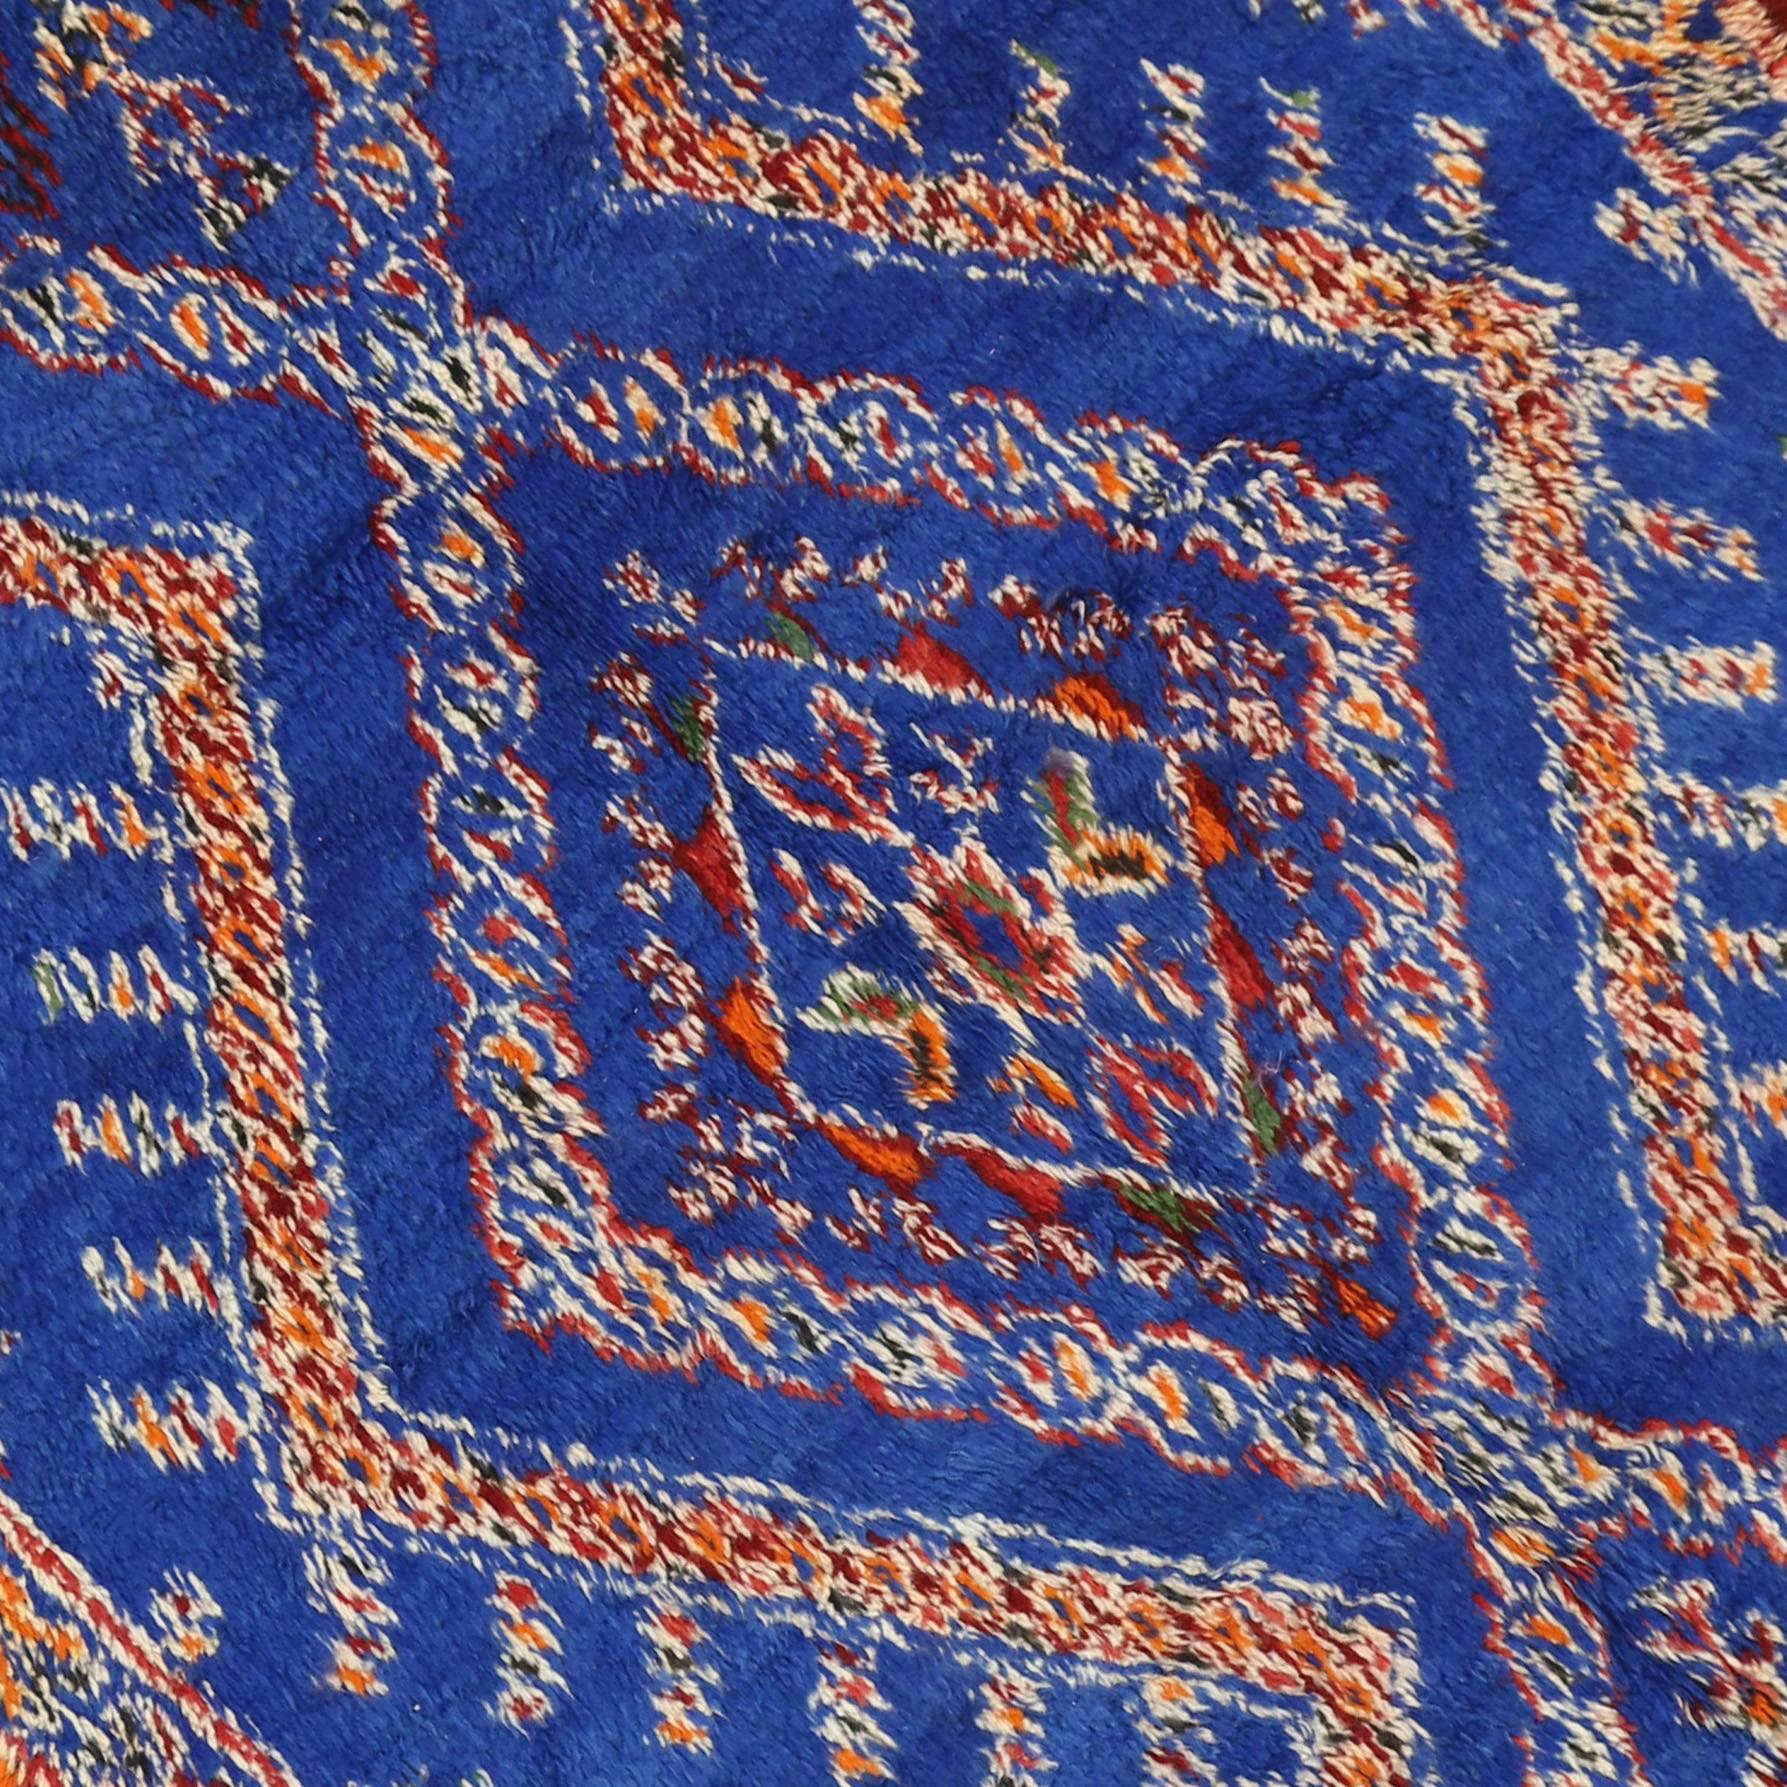 Hand-Knotted Blue Beni Ourain Moroccan Rug with Mid-Century Modern Style